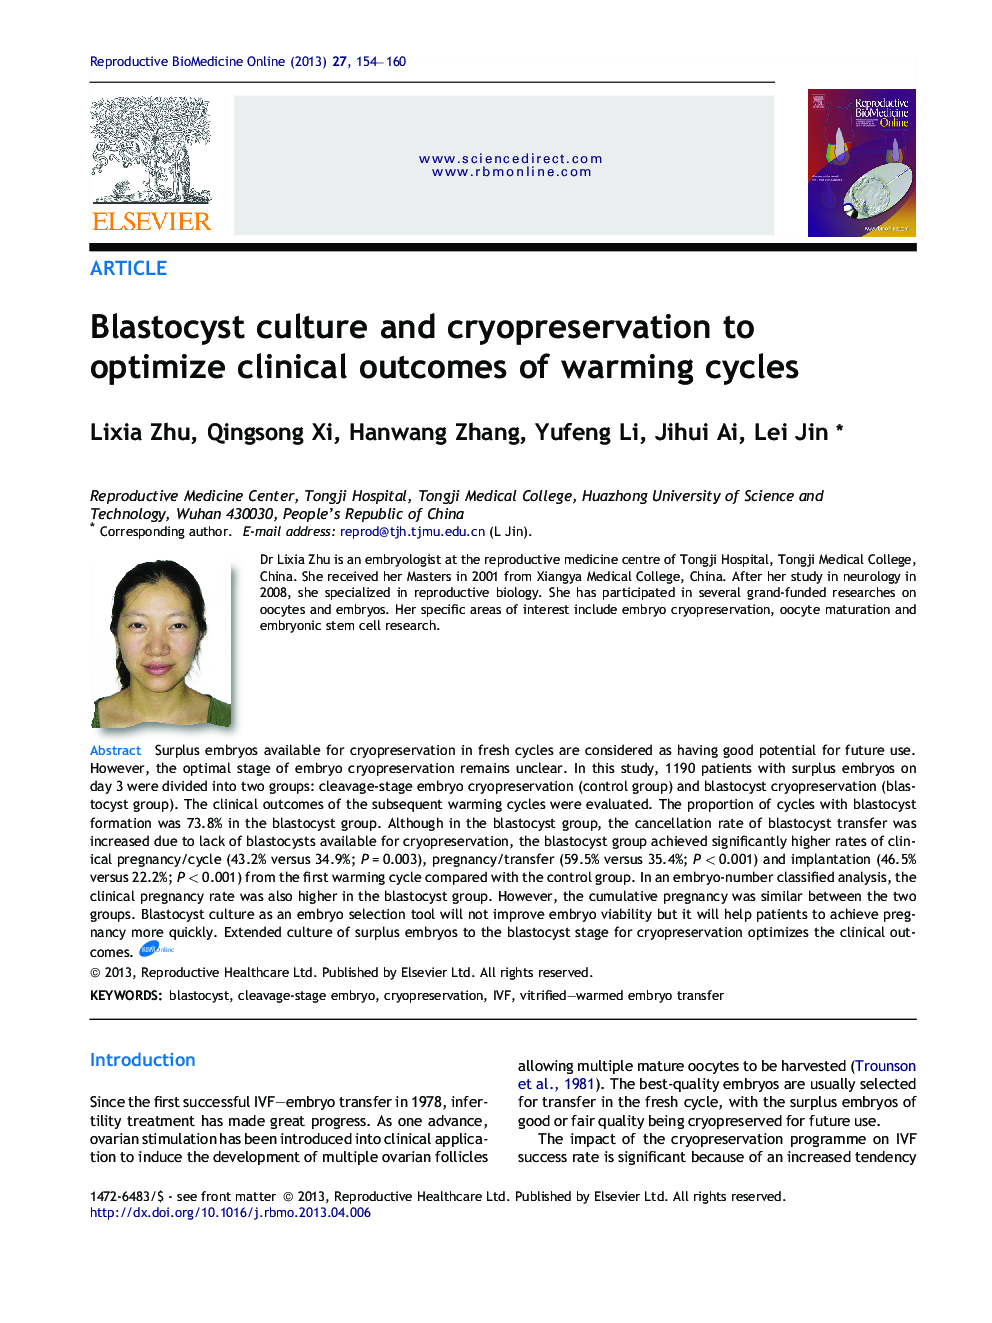 Blastocyst culture and cryopreservation to optimize clinical outcomes of warming cycles 